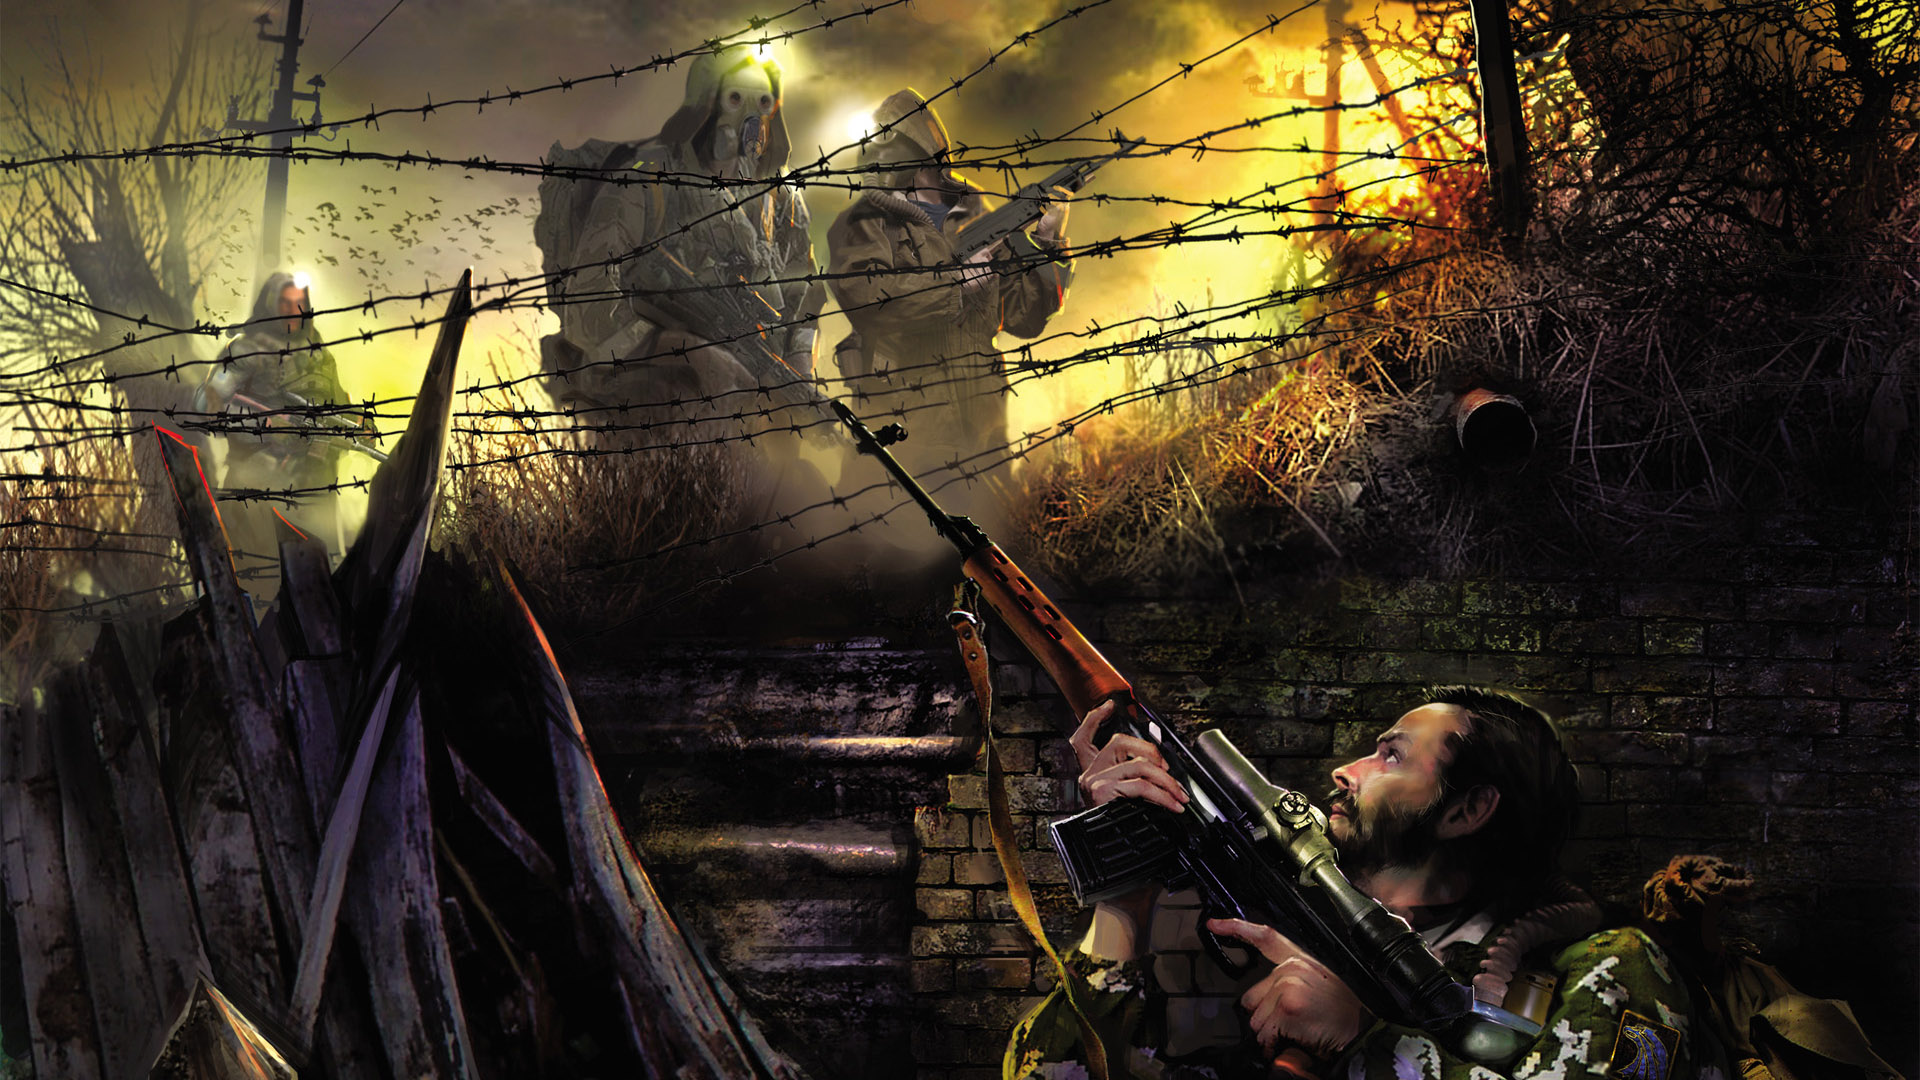 Waithing: Video Game desktop wallpaper - S.T.A.L.K.E.R. - mysterious and atmospheric scene.